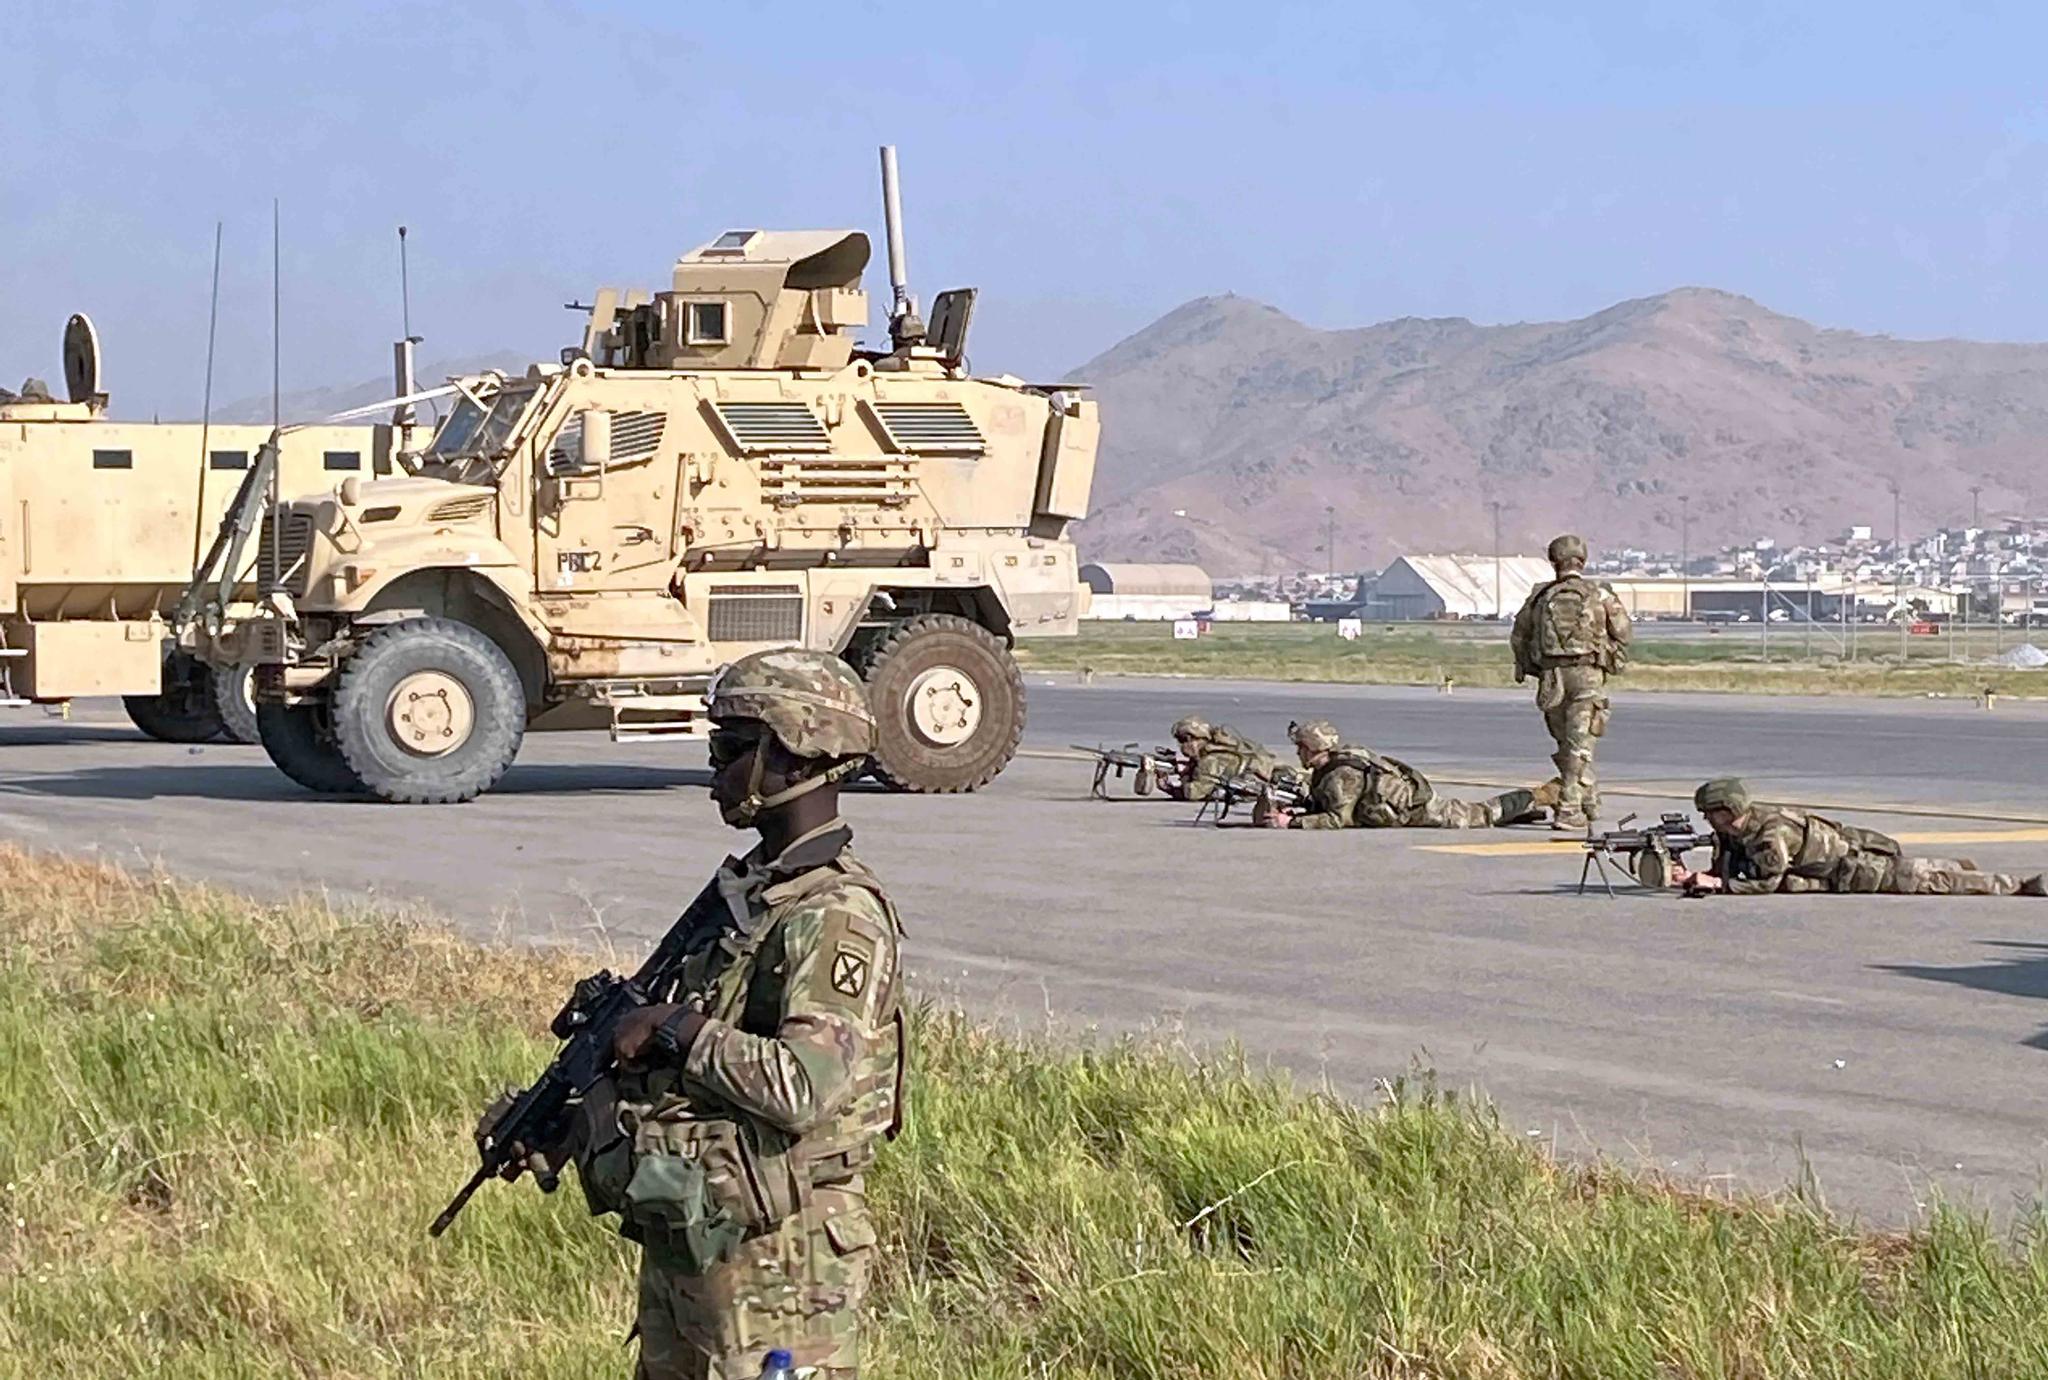 U.S soldiers stand guard along a perimeter at the international airport in Kabul, Afghanistan, Monday, Aug. 16, 2021.